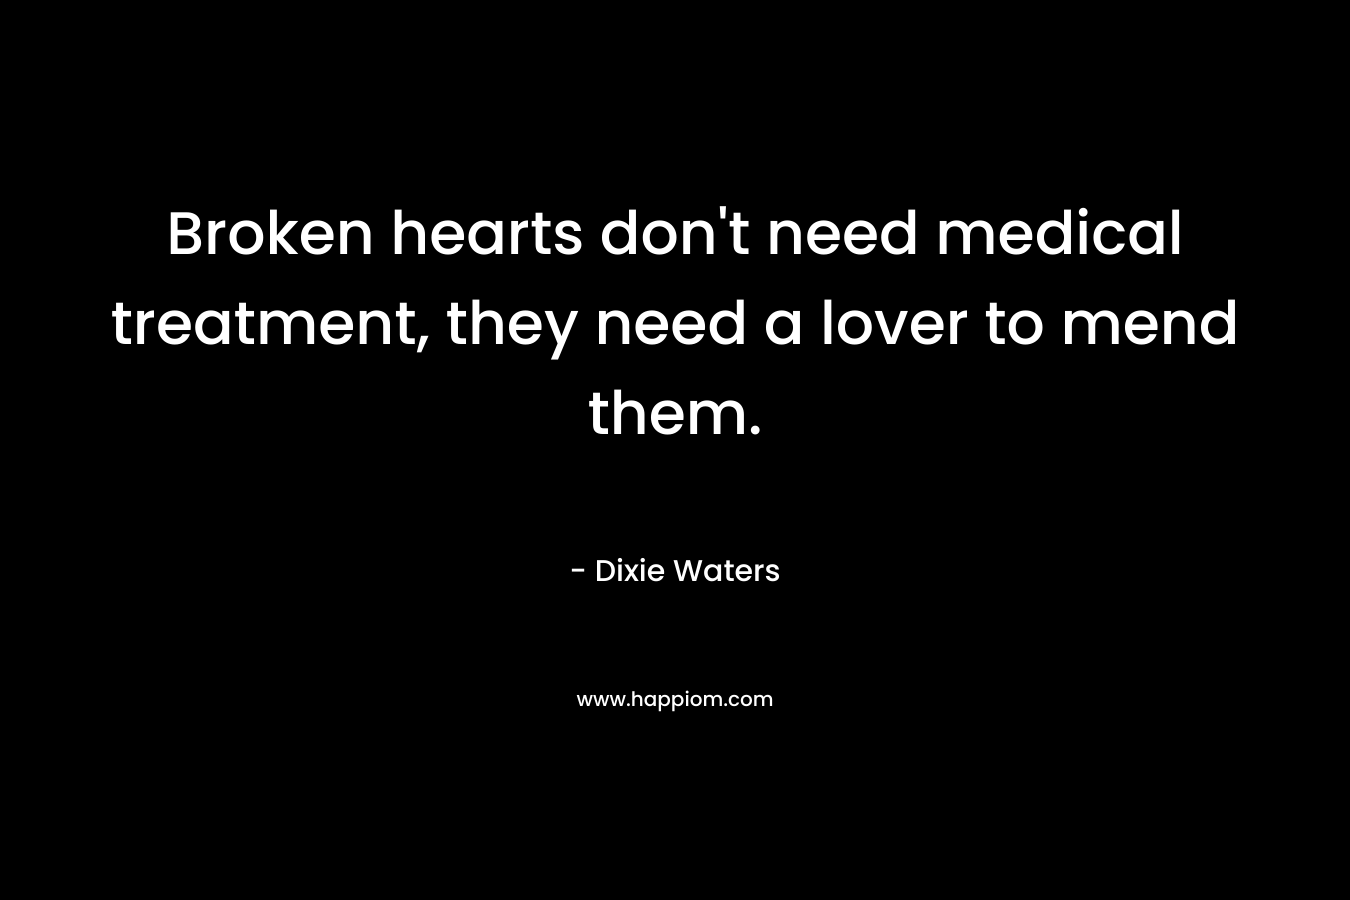 Broken hearts don't need medical treatment, they need a lover to mend them.